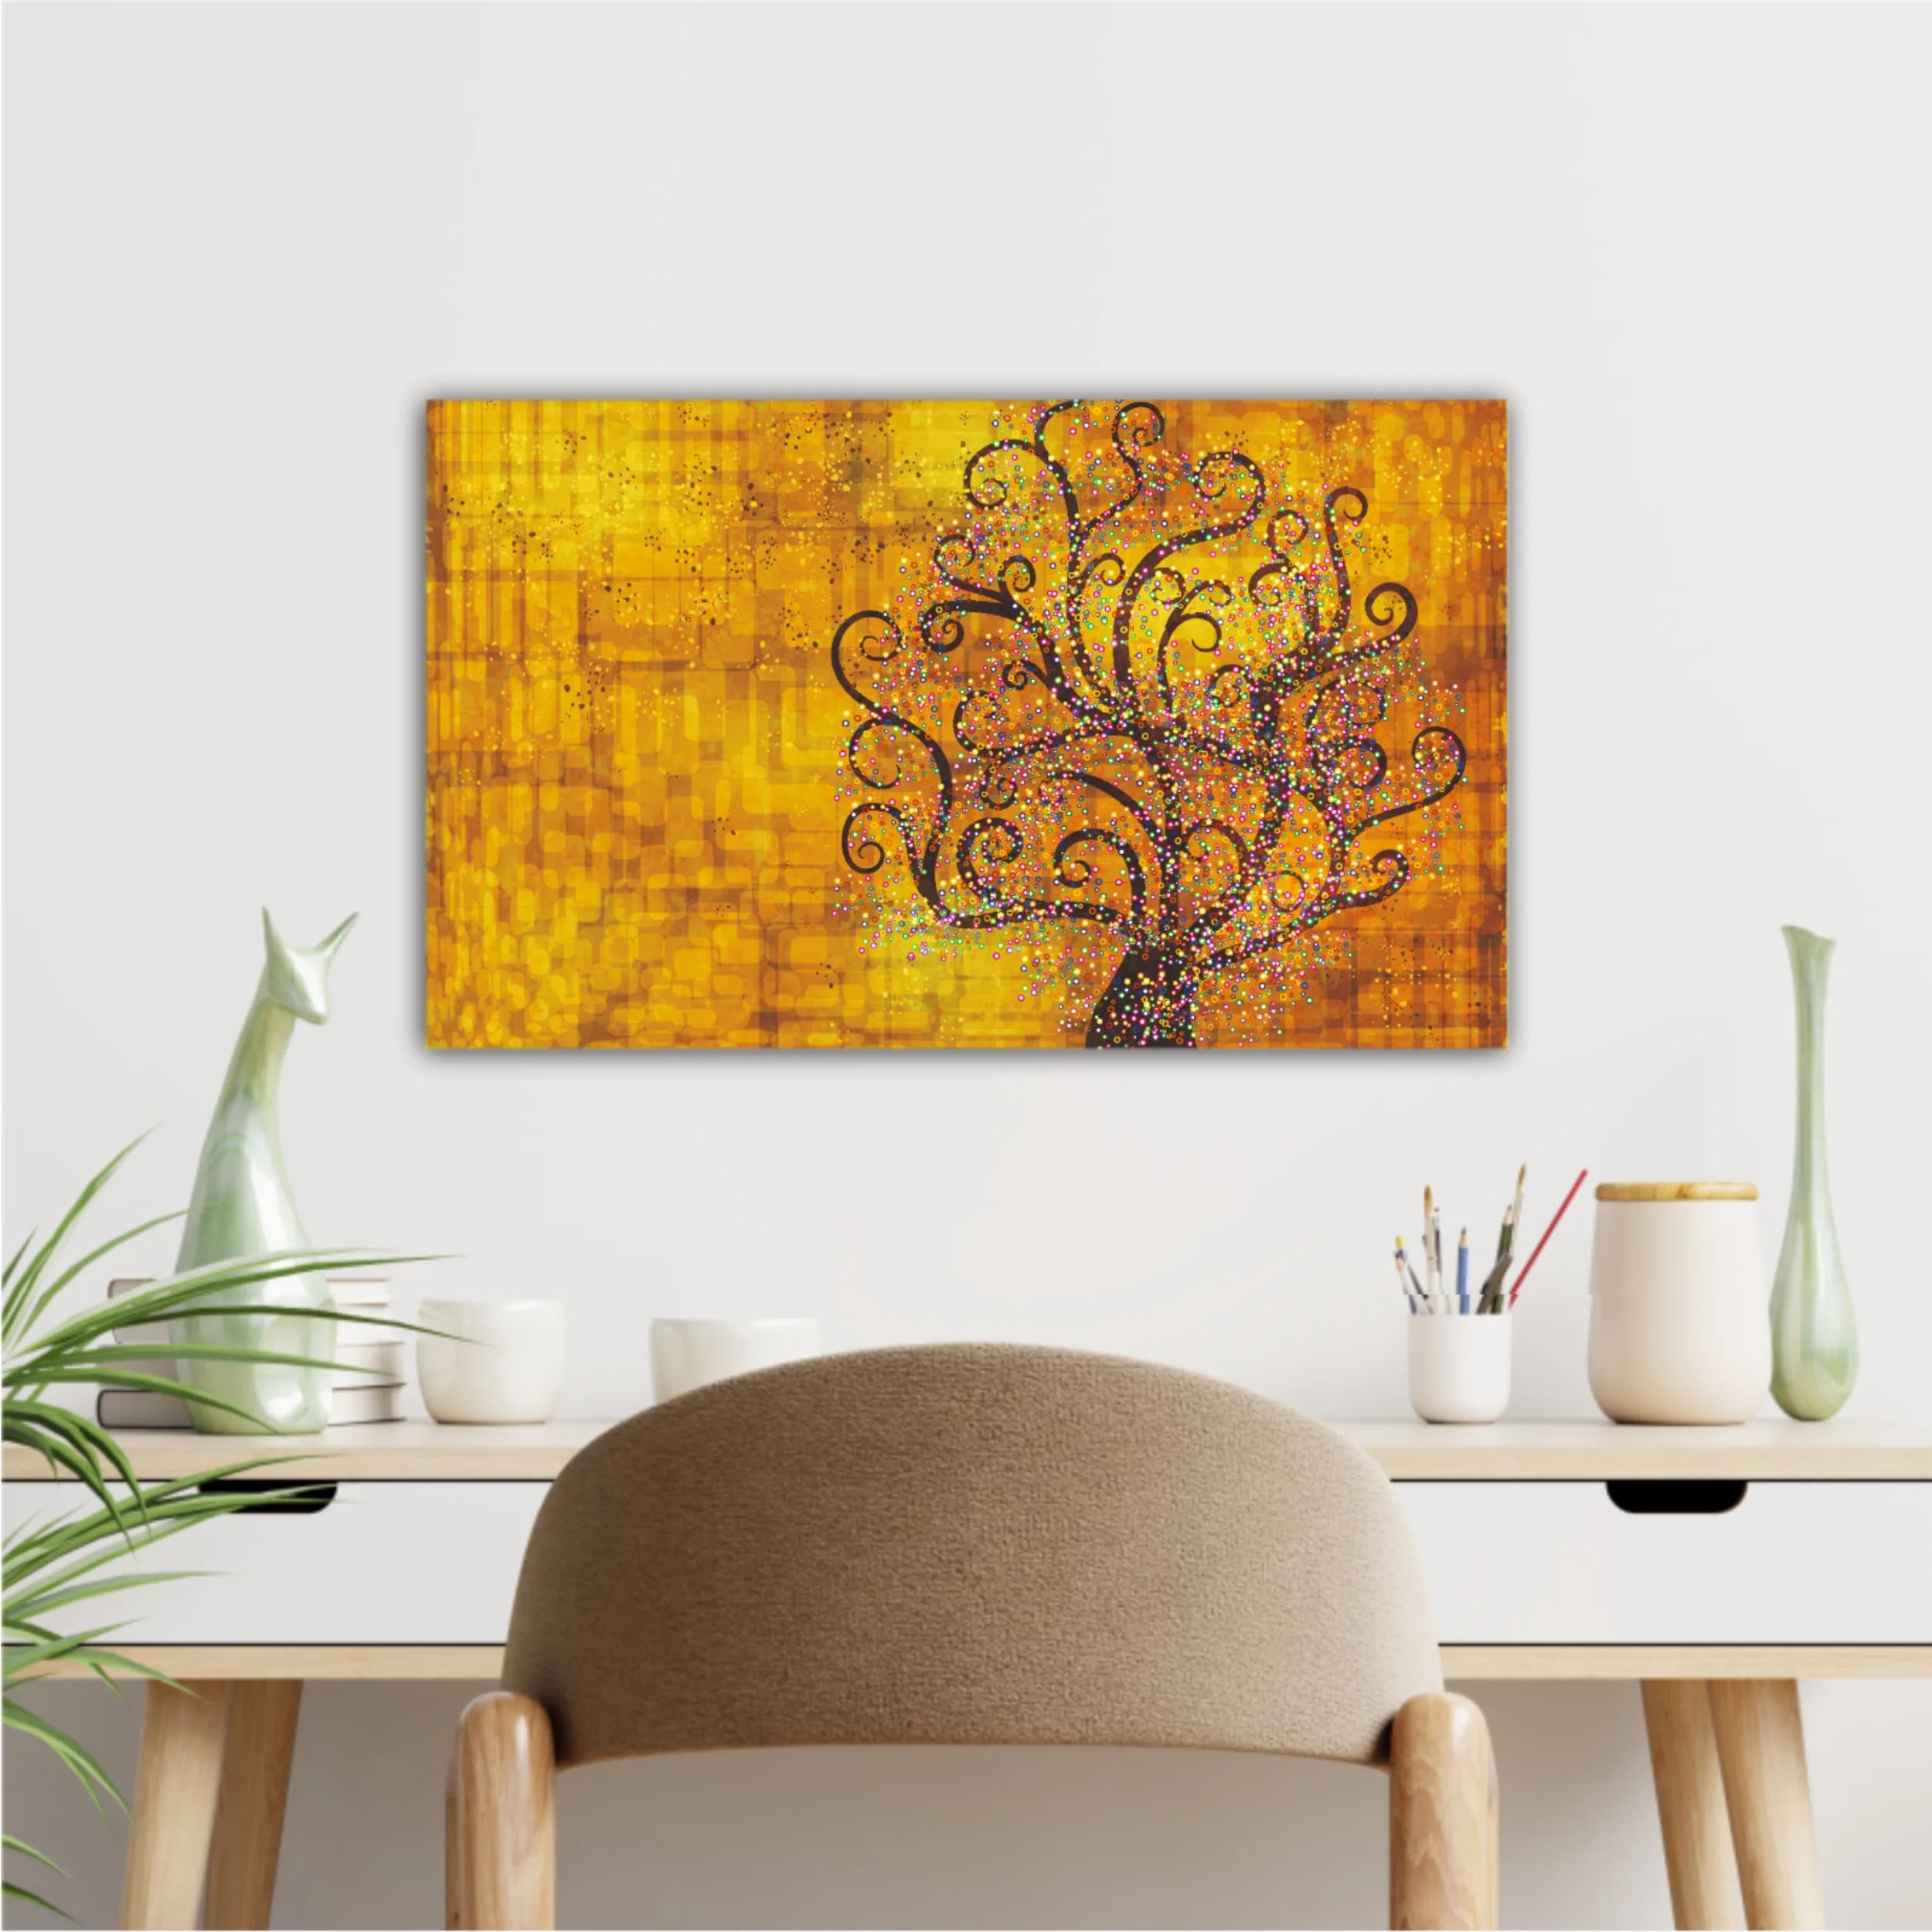 Abstract tree on a gold background in style of Gustav Klimt painting